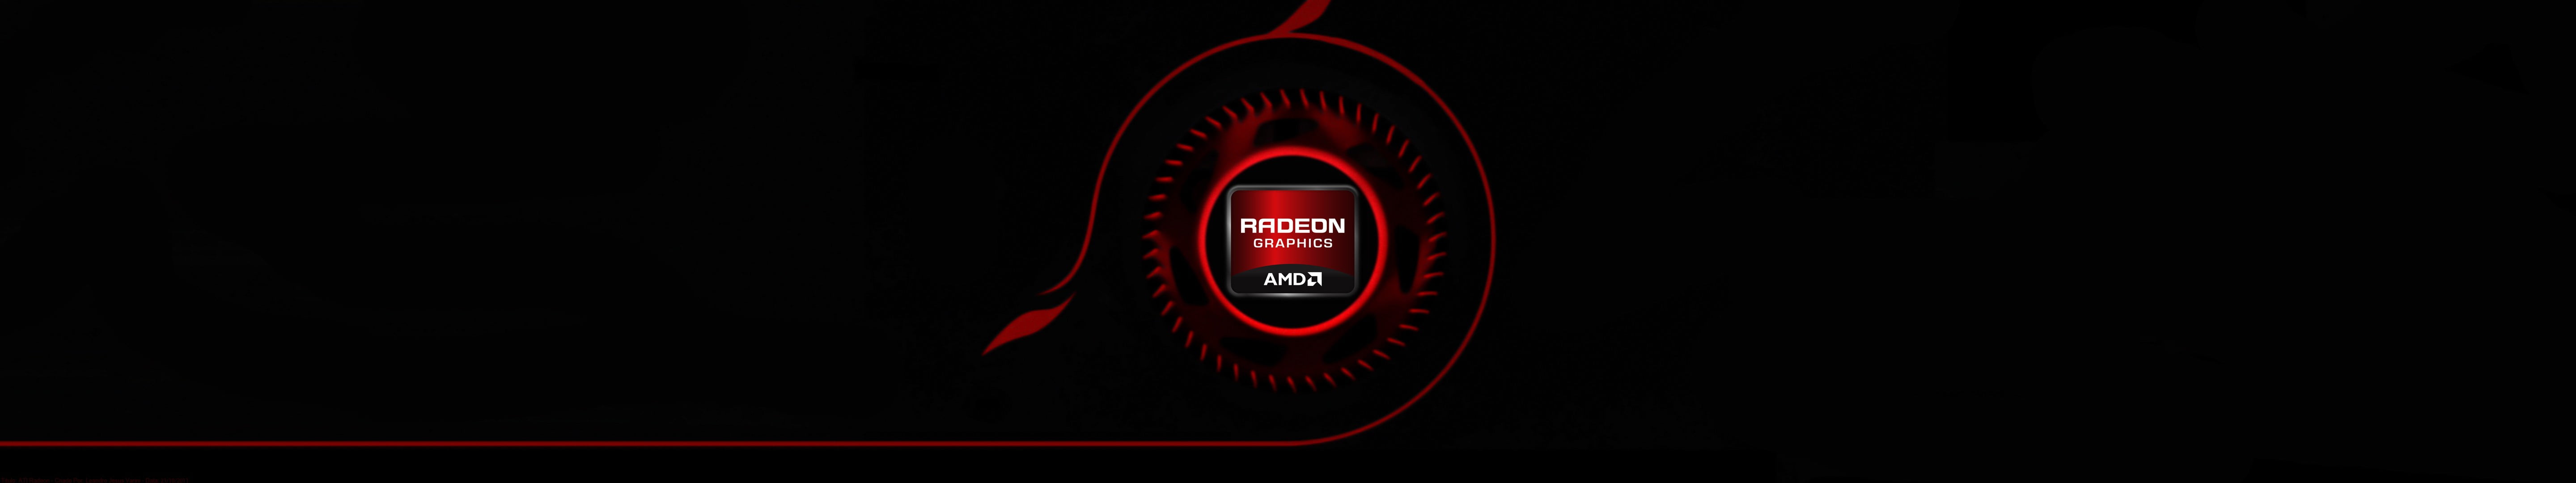 round red and black logo, AMD, Radeon, black background, copy space